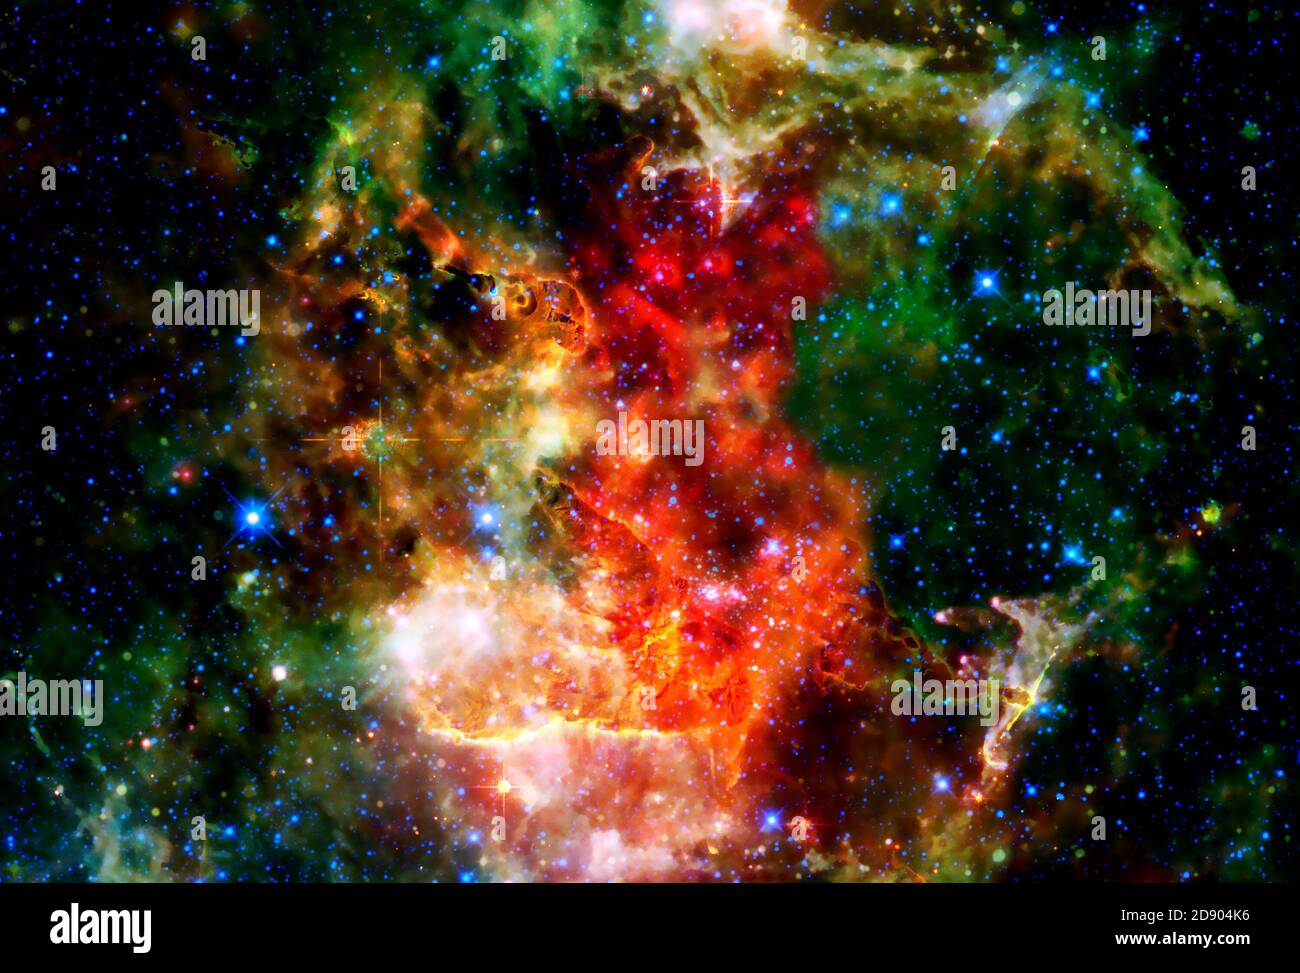 space nebula made of a composite of various nebulae Stock Photo